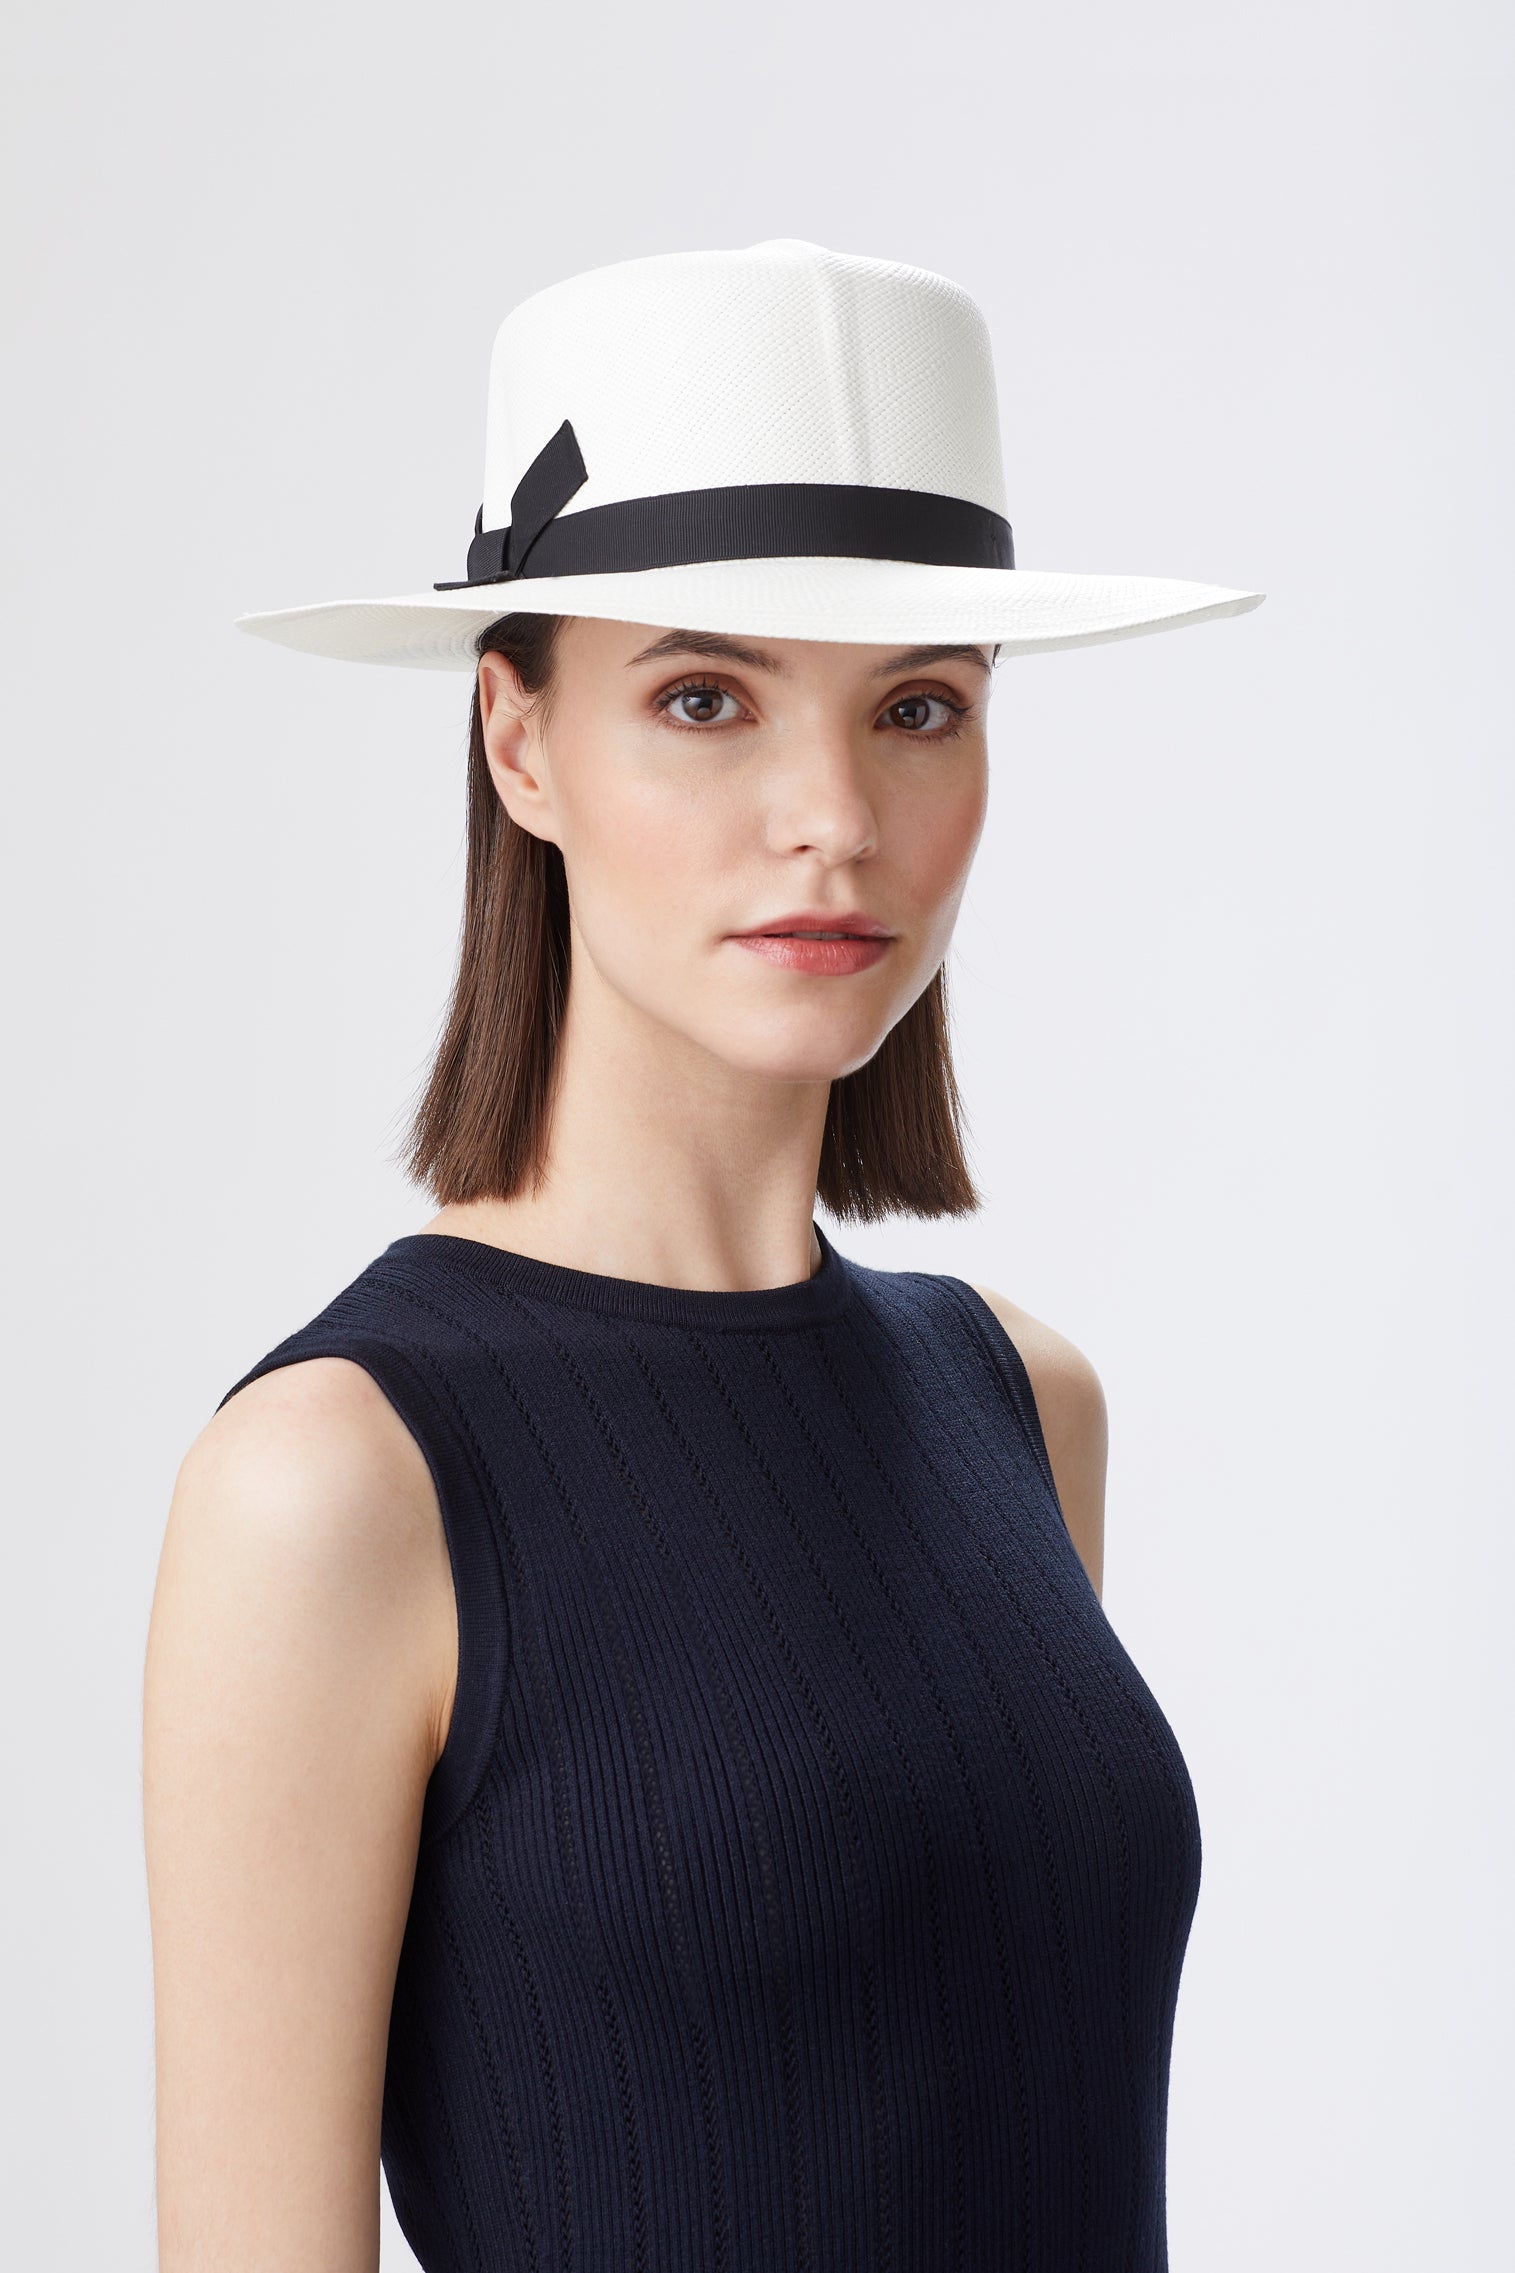 St Ives Rollable Panama - Hats for Tall People - Lock & Co. Hatters London UK